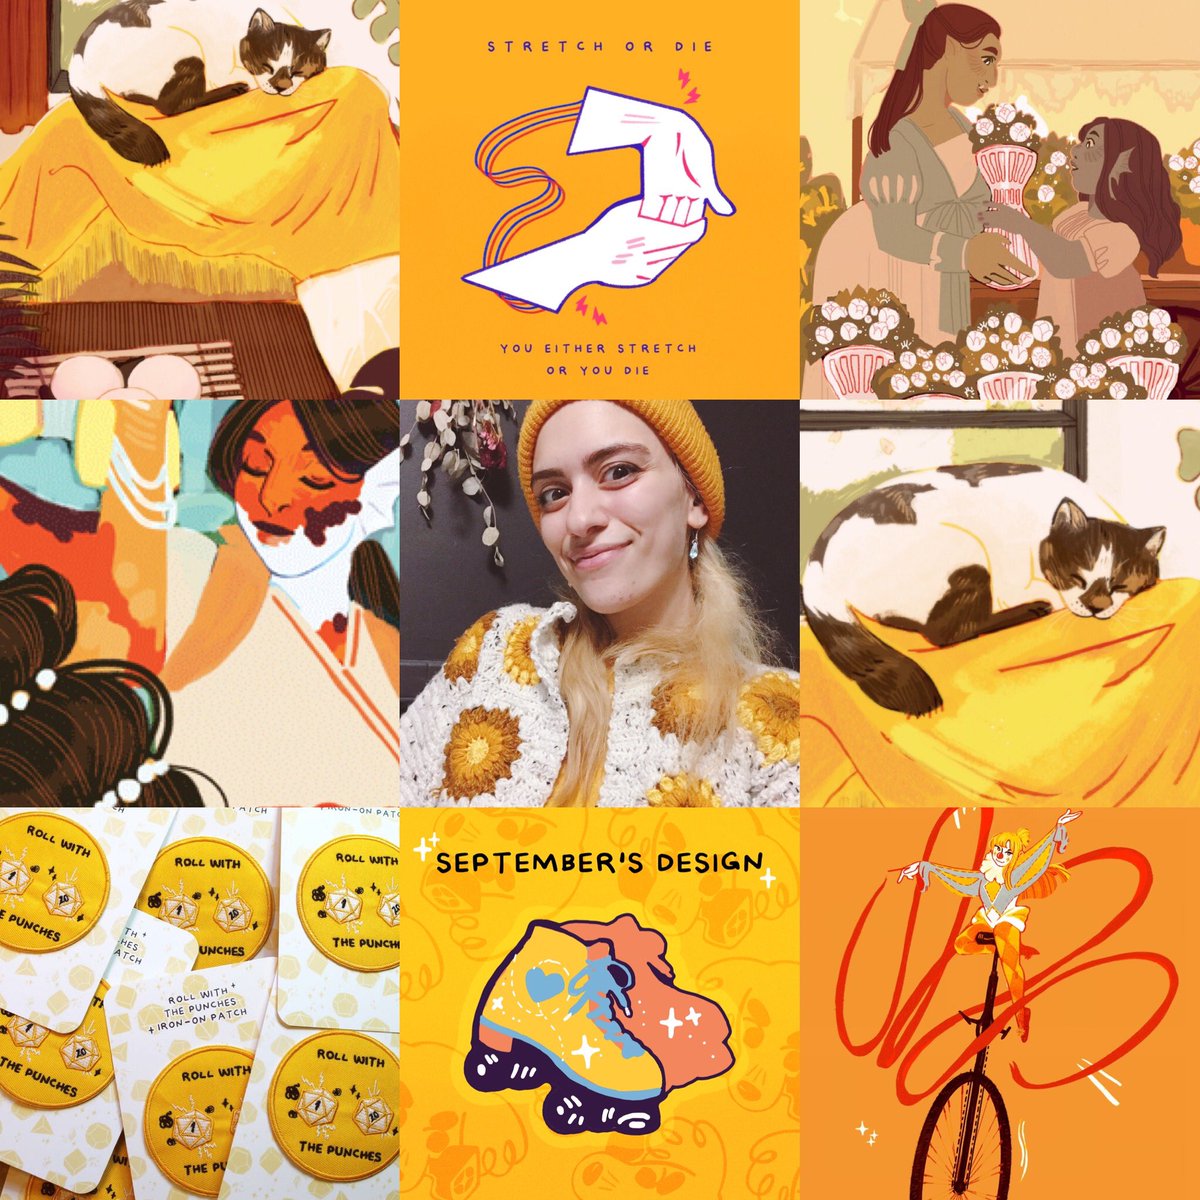 #artvsartist2021 but in two flavors ✨ 